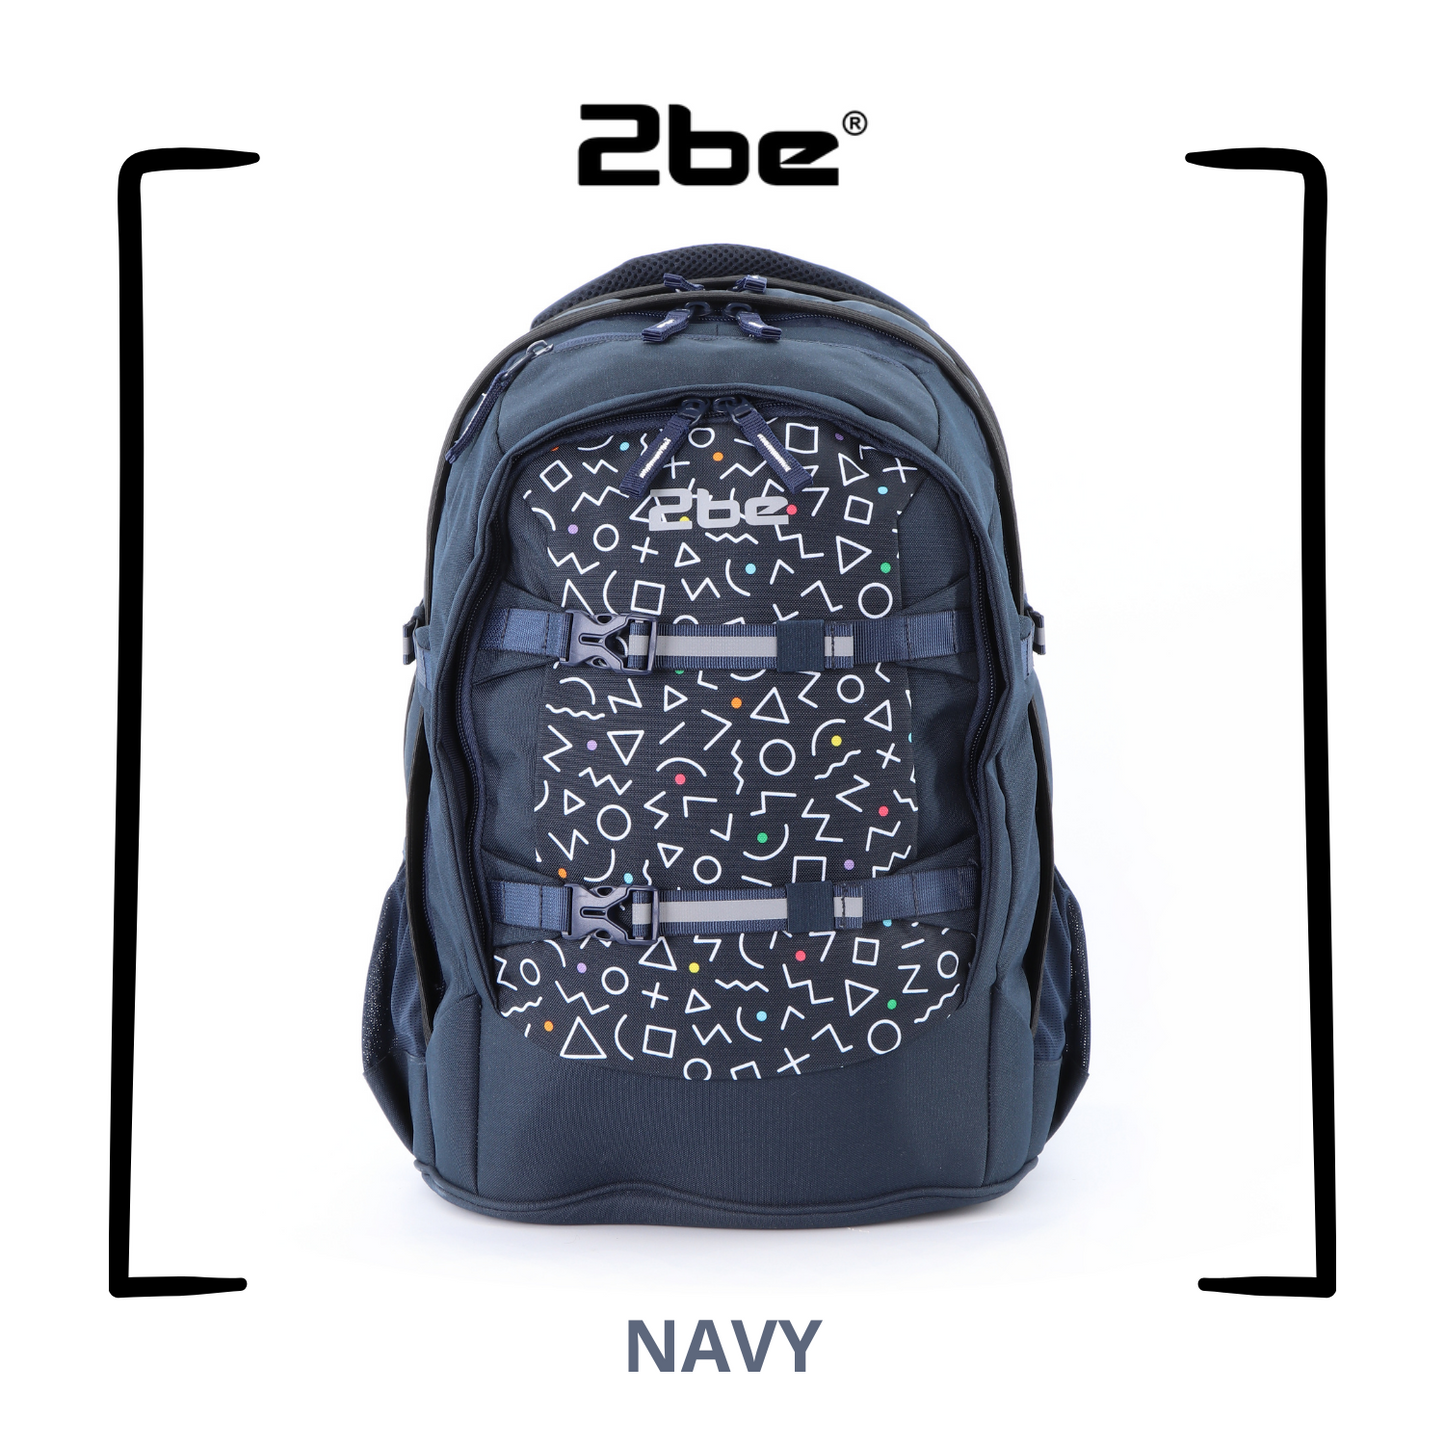 2be School Backpack with Spine-support Ergonomic Feature with Reflective logo and parts (for Kids)- 66320